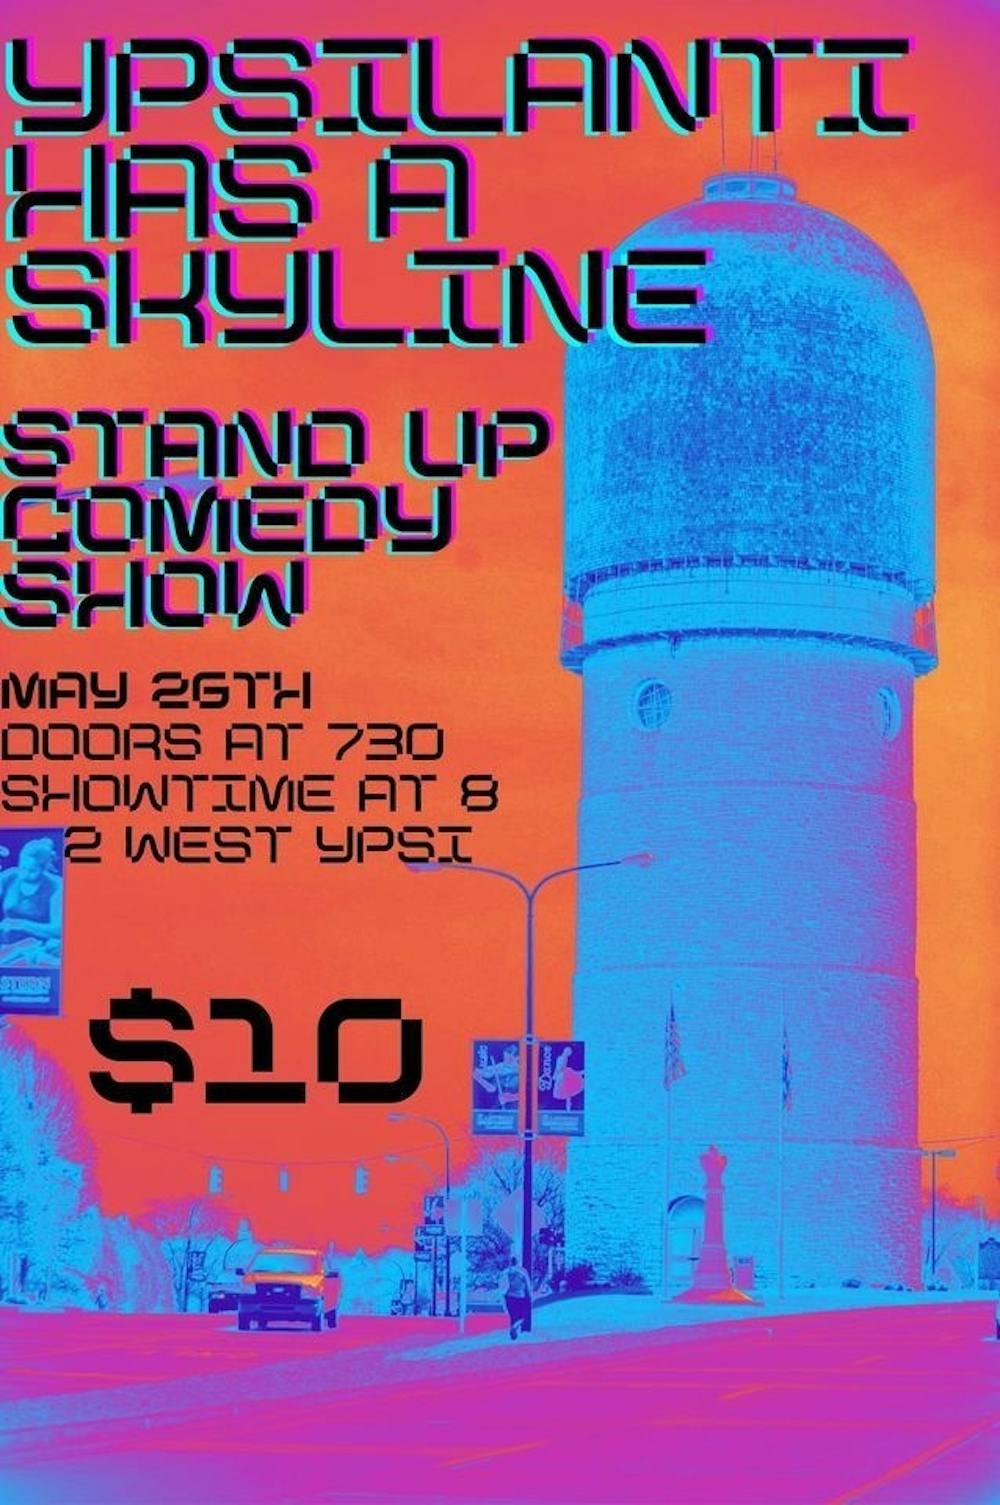 2 West Ypsi hosts stand-up comedy show in downtown Ypsilanti